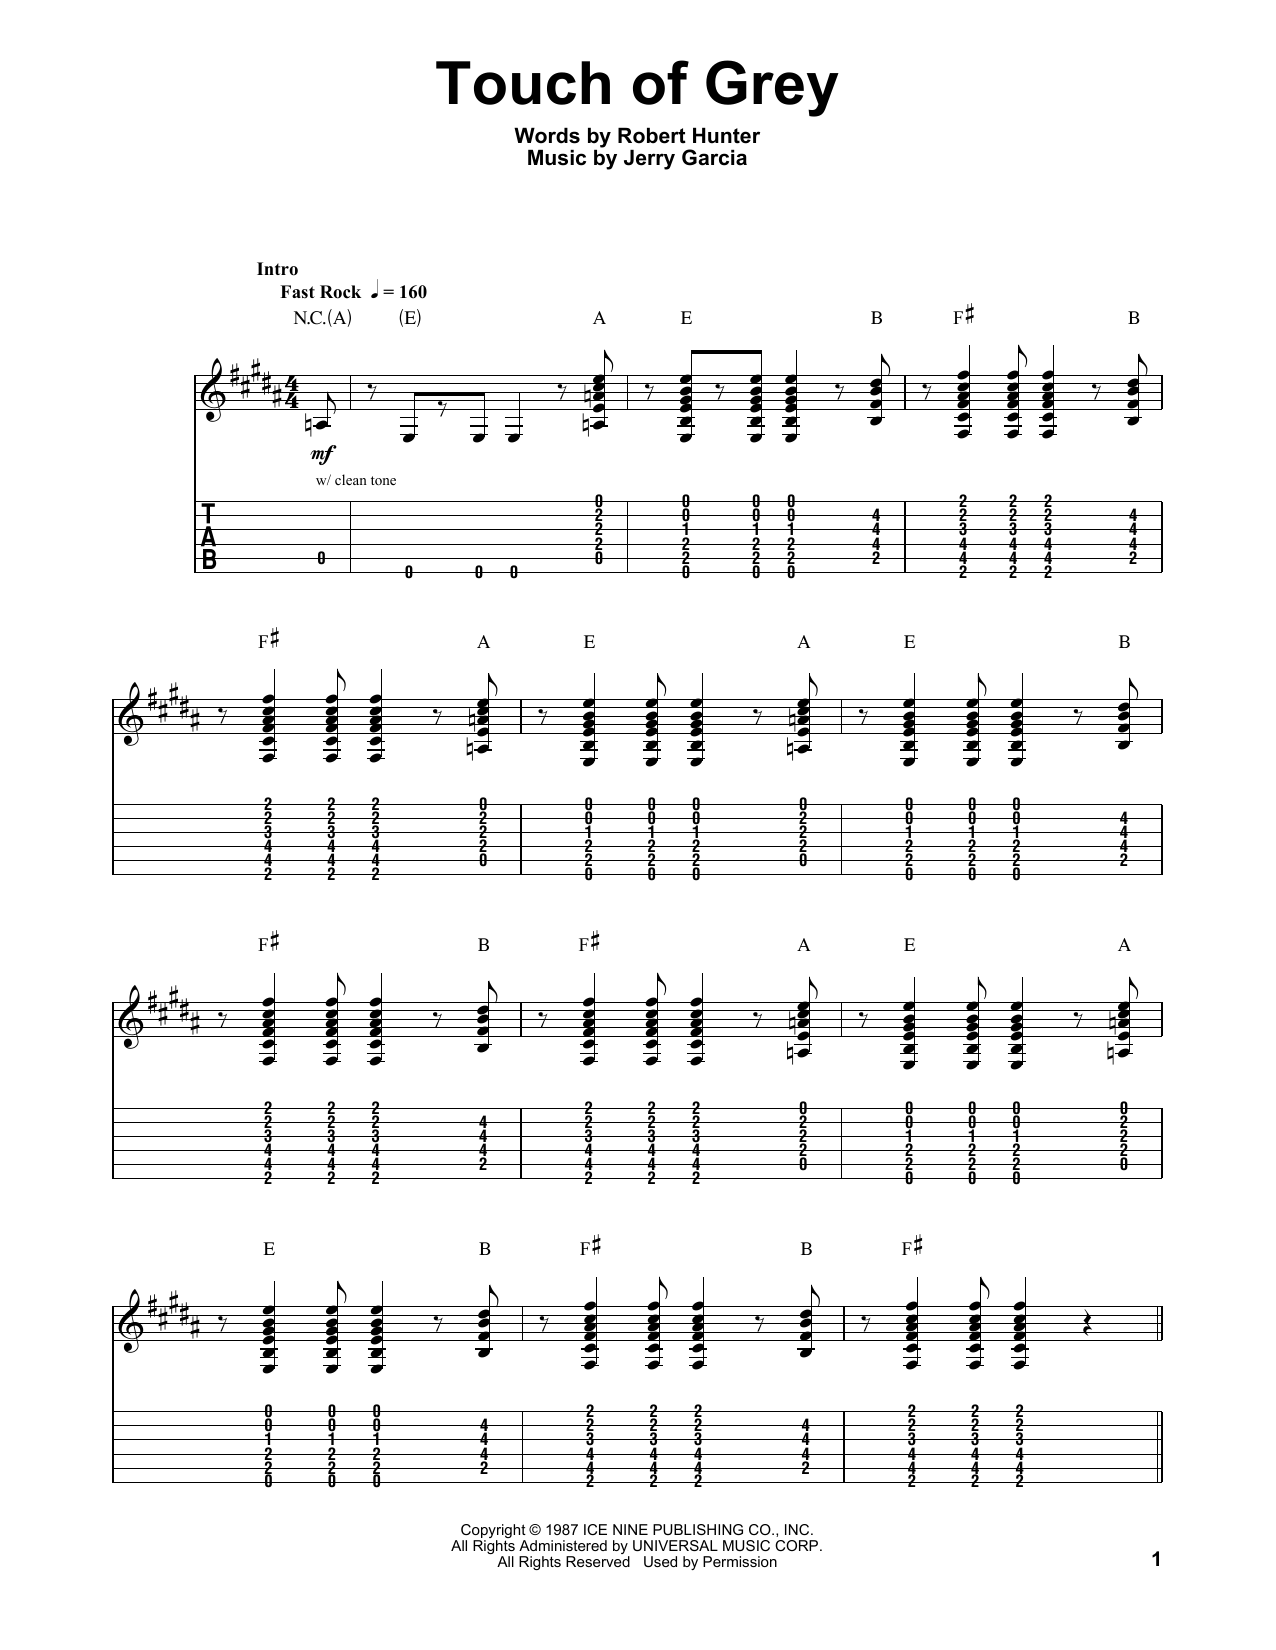 Download Grateful Dead Touch Of Grey Sheet Music